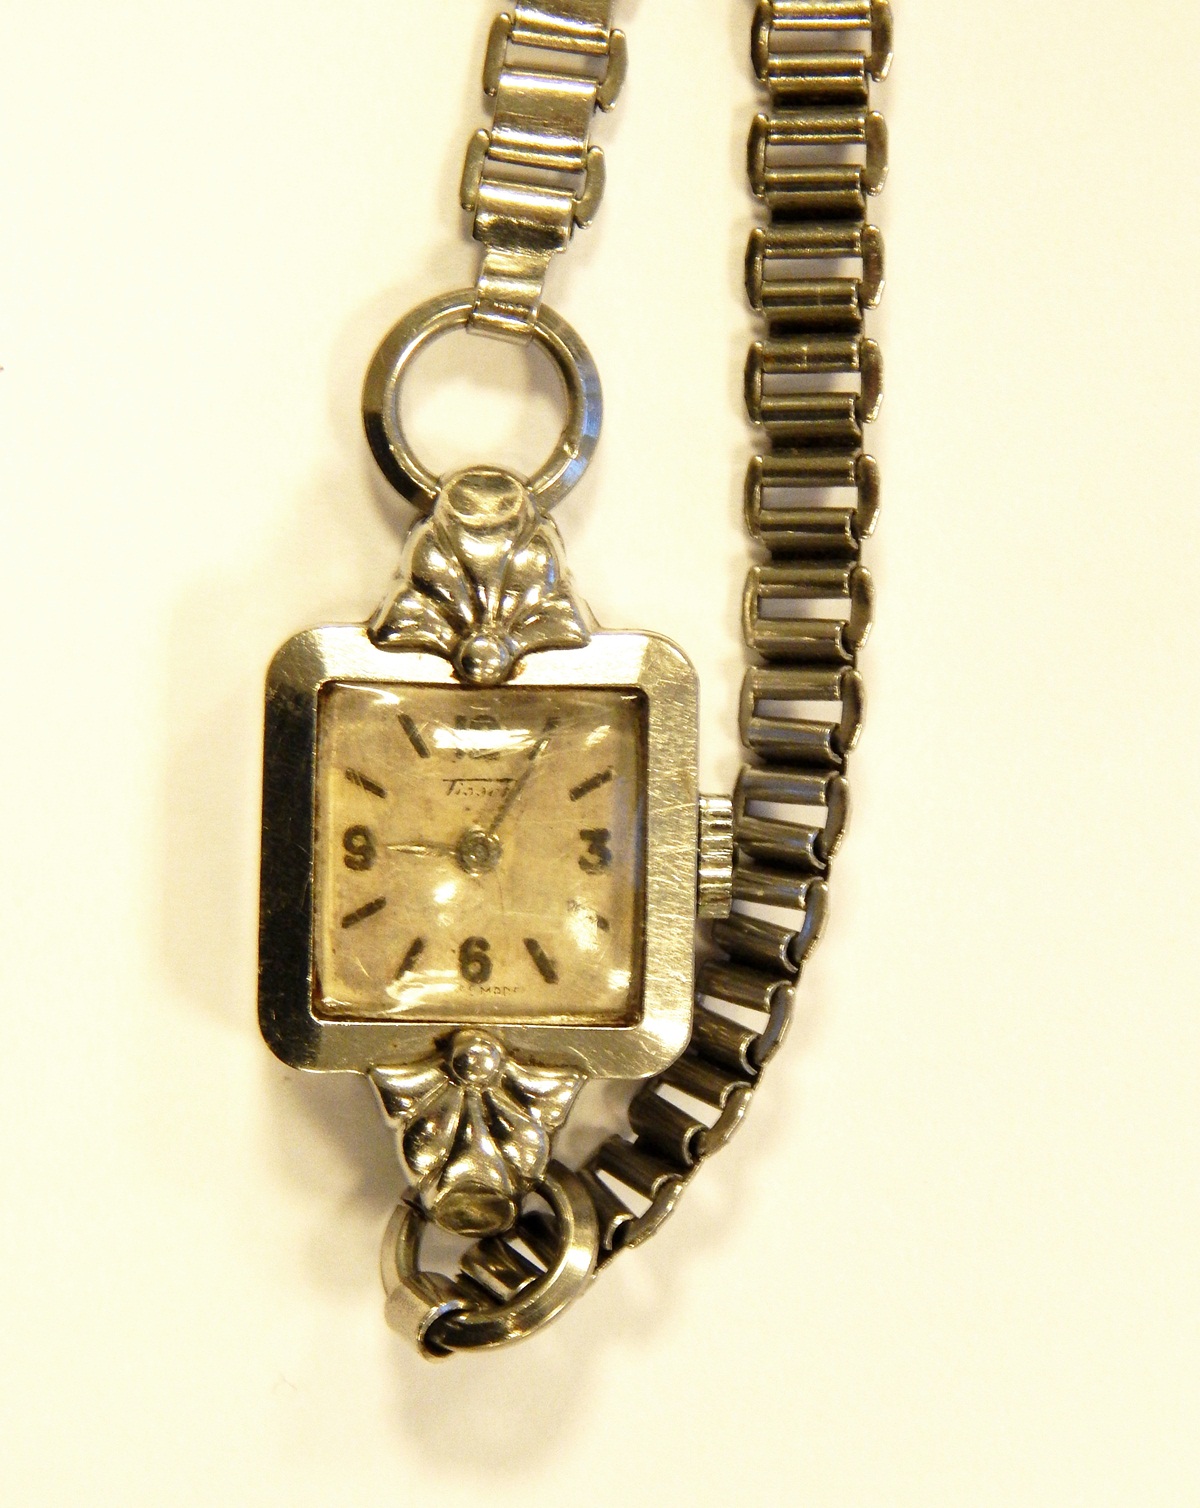 Tissot lady's evening watch with silvered square dial and chain bracelet